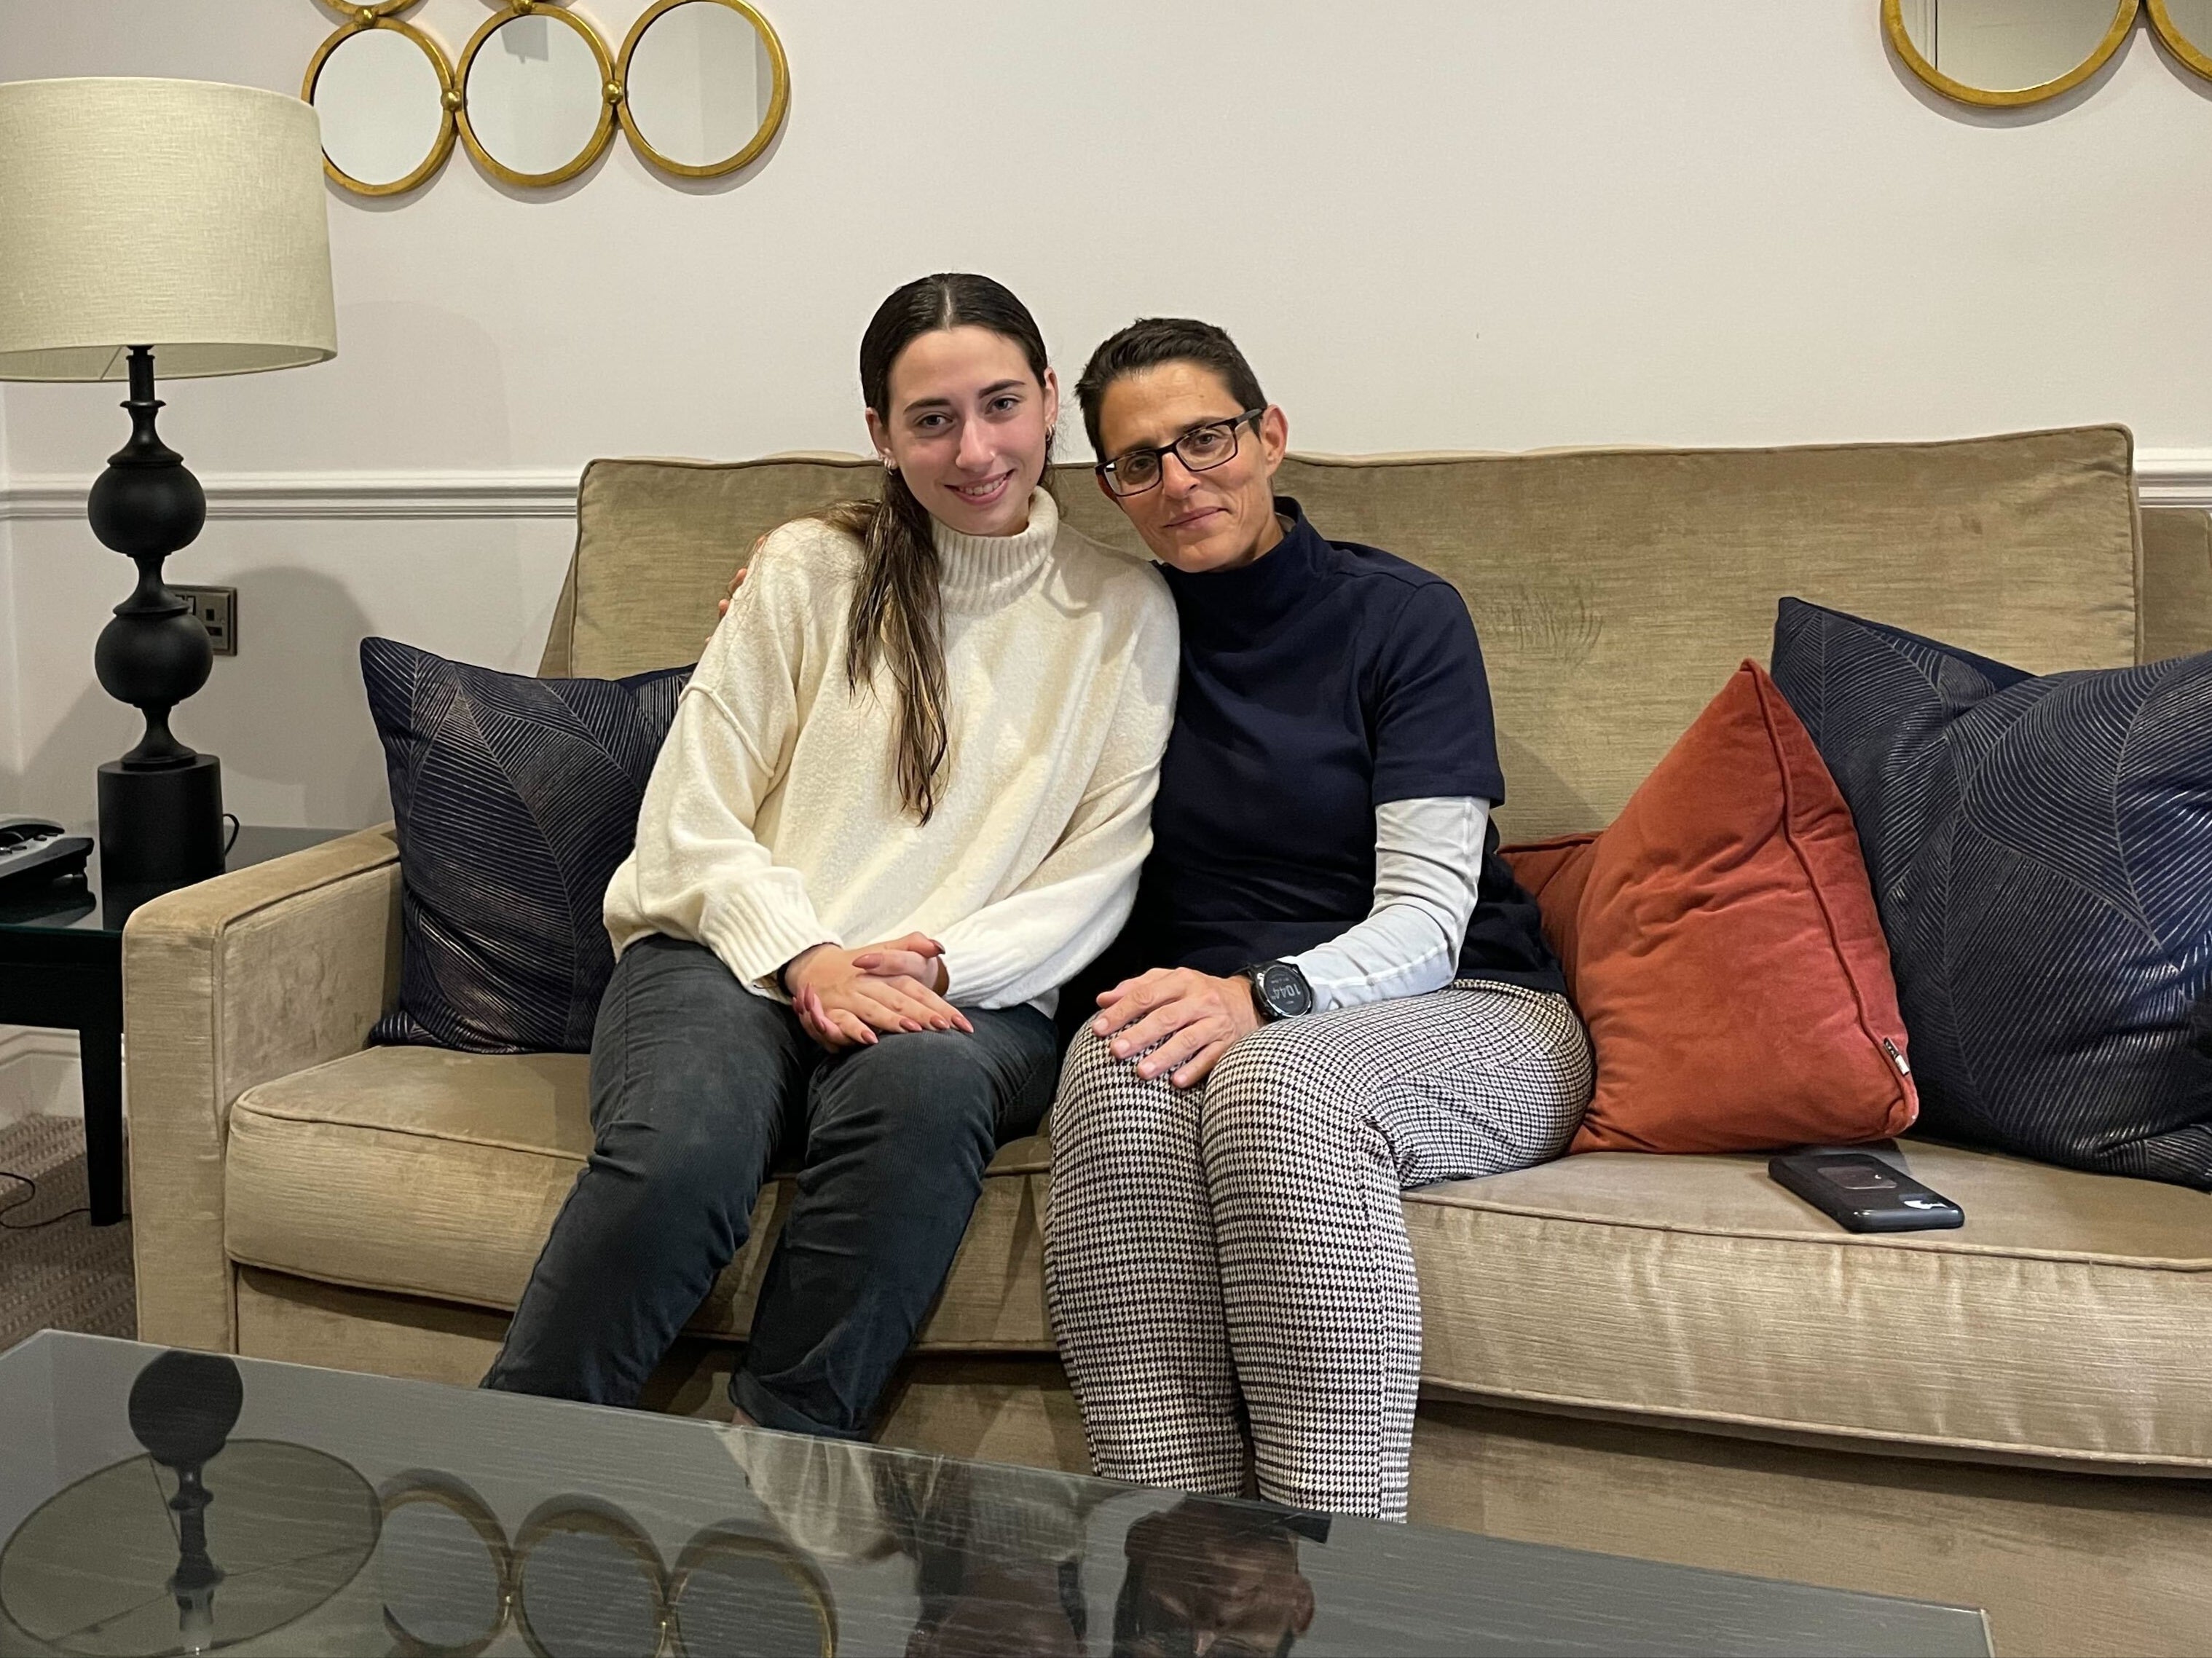 Irene Shavit, 22, and Aleyet Epstein, 50, spoke to The Independent from London